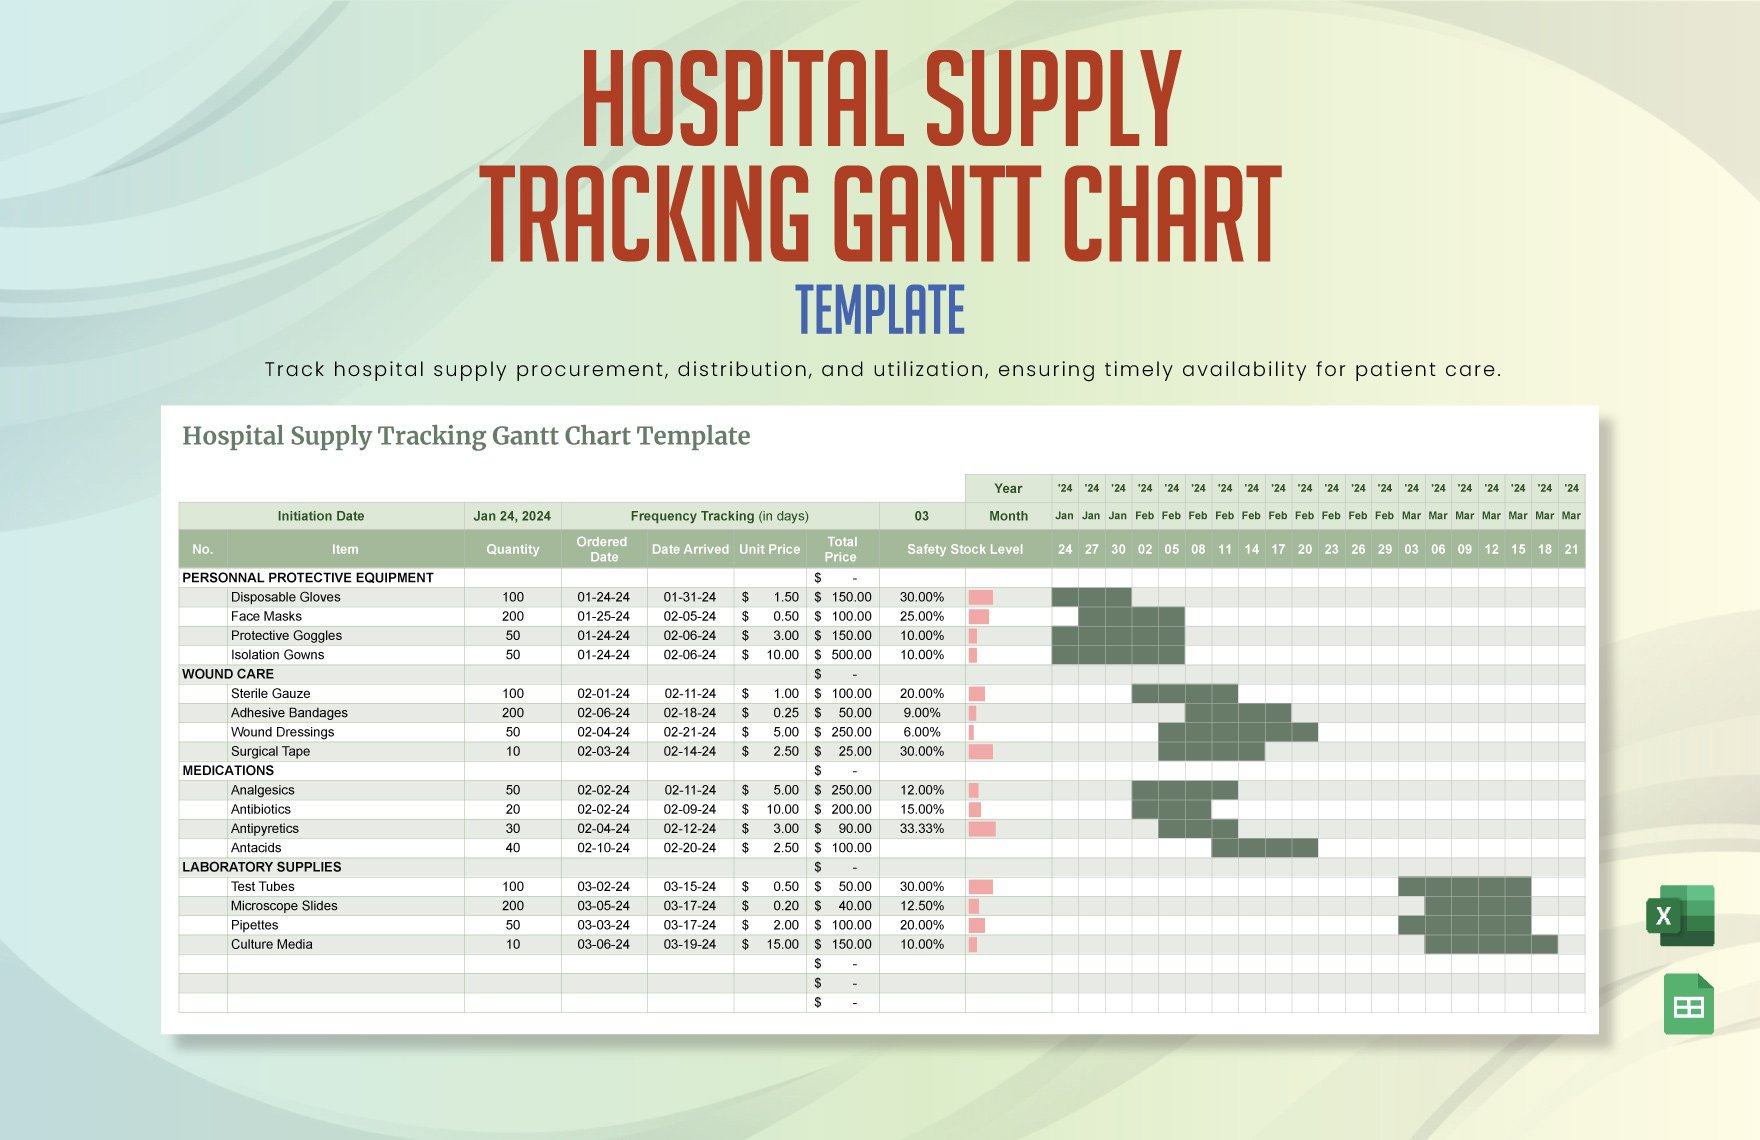 Hospital Supply Tracking Gantt Chart Template in Excel, Google Sheets